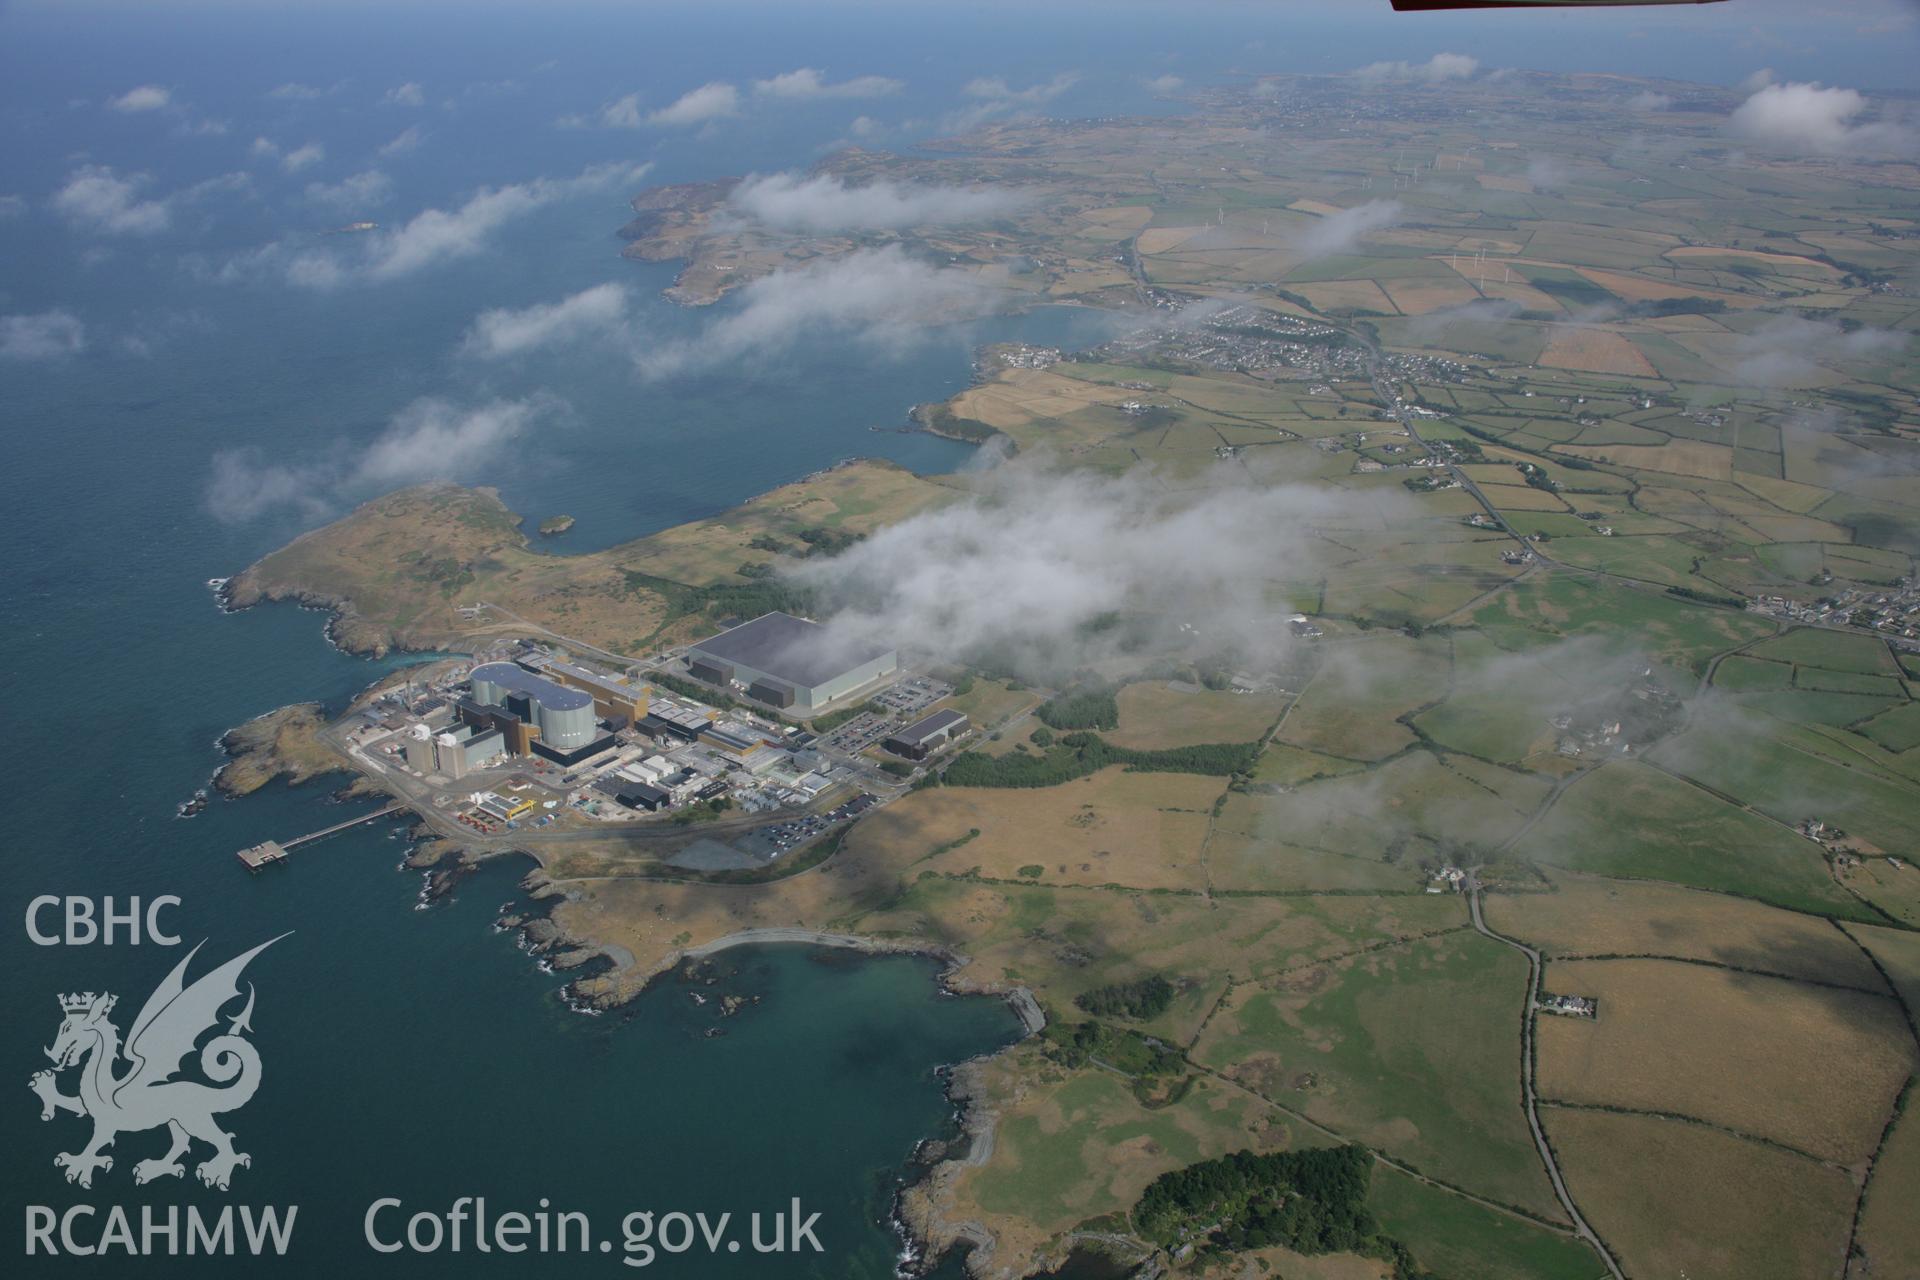 RCAHMW colour oblique aerial photograph of Wylfa Nuclear Power Station. A high landscape view. Taken on 14 August 2006 by Toby Driver.